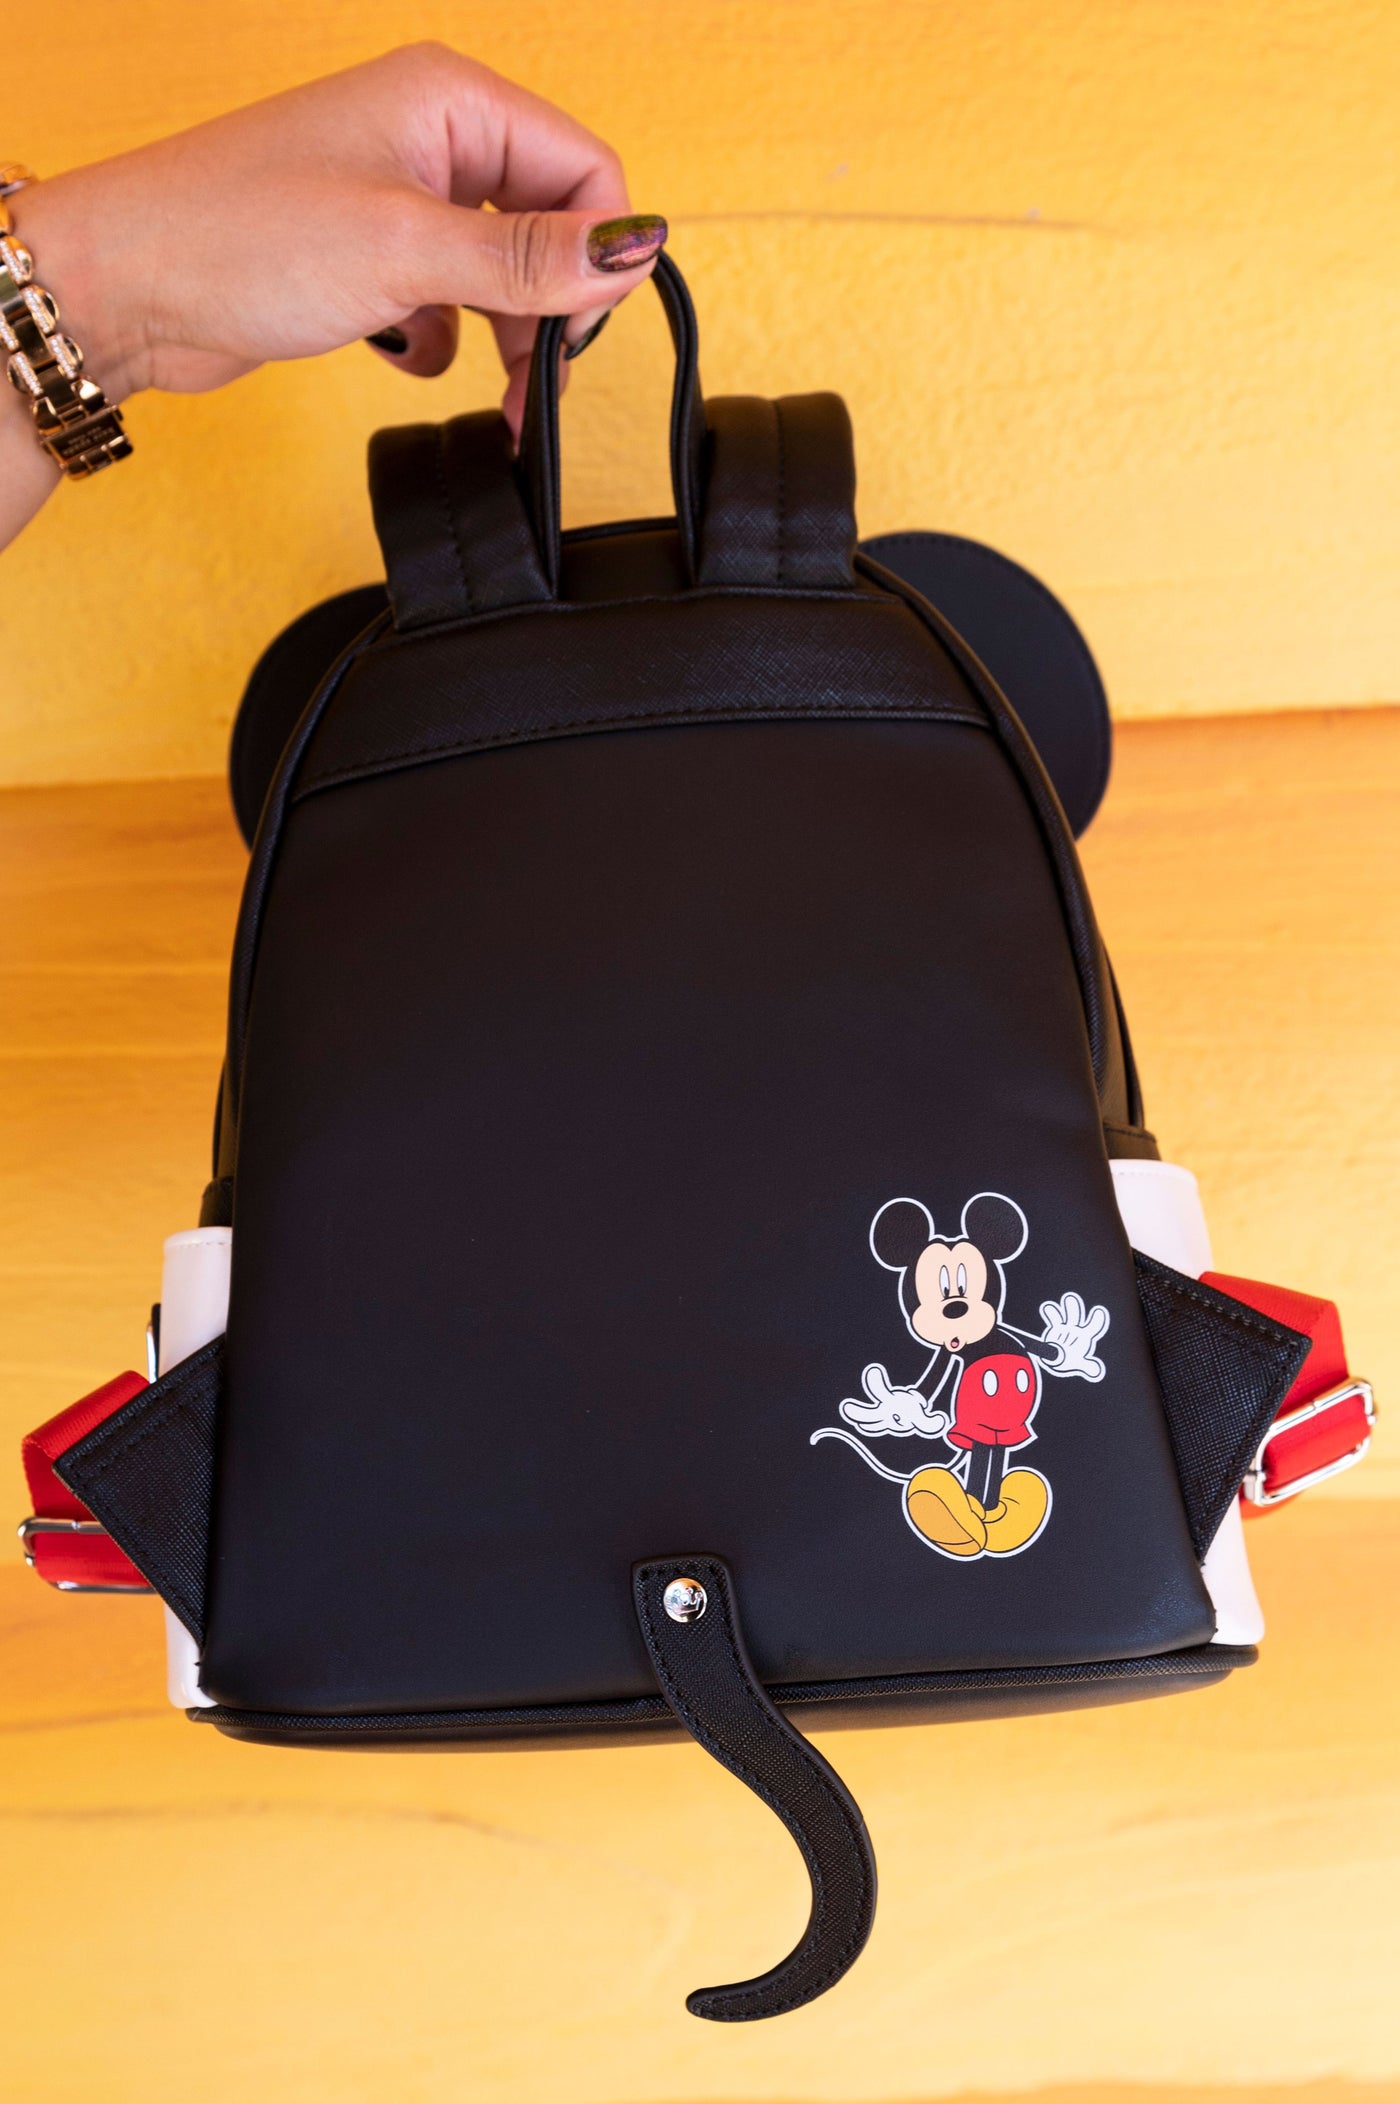 671803454279 - 707 Street Exclusive - Loungefly Disney Mickey Mouse Cosplay Mini Backpack - IRL Back